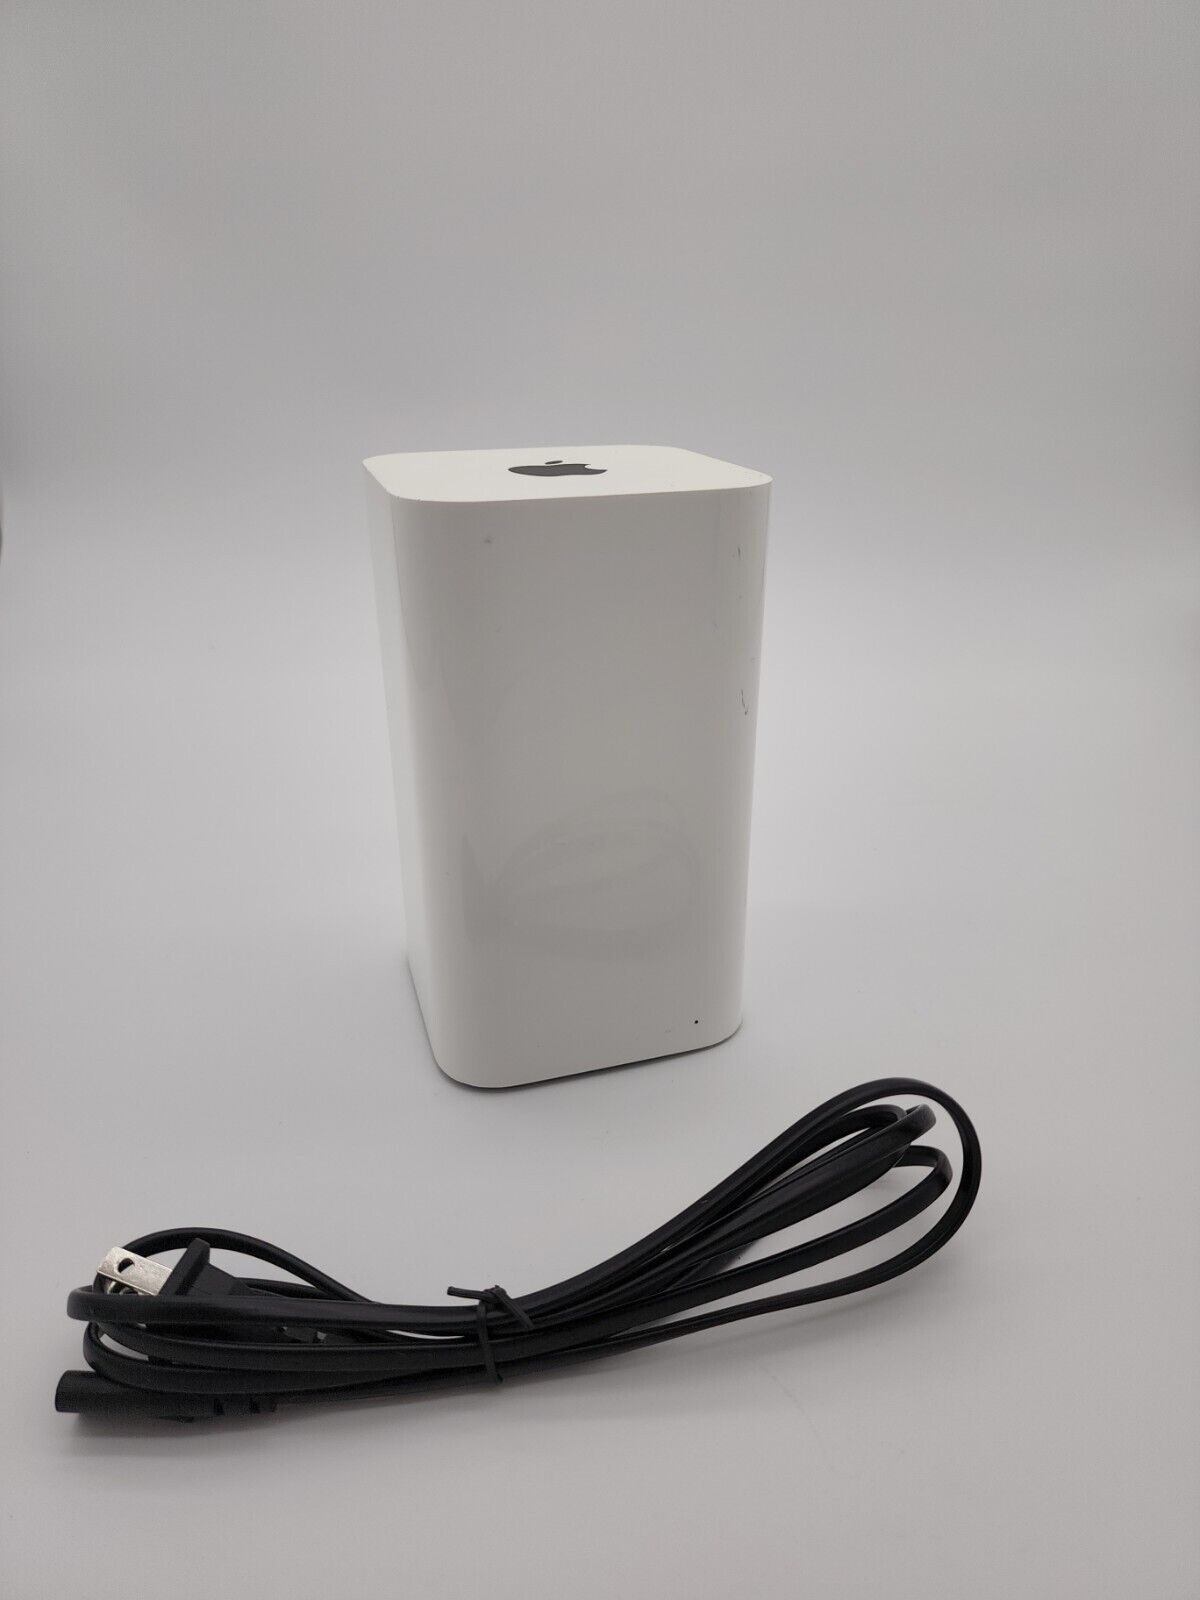 Apple AirPort Extreme A1521 Base Station Router TESTED 1Q05180#3